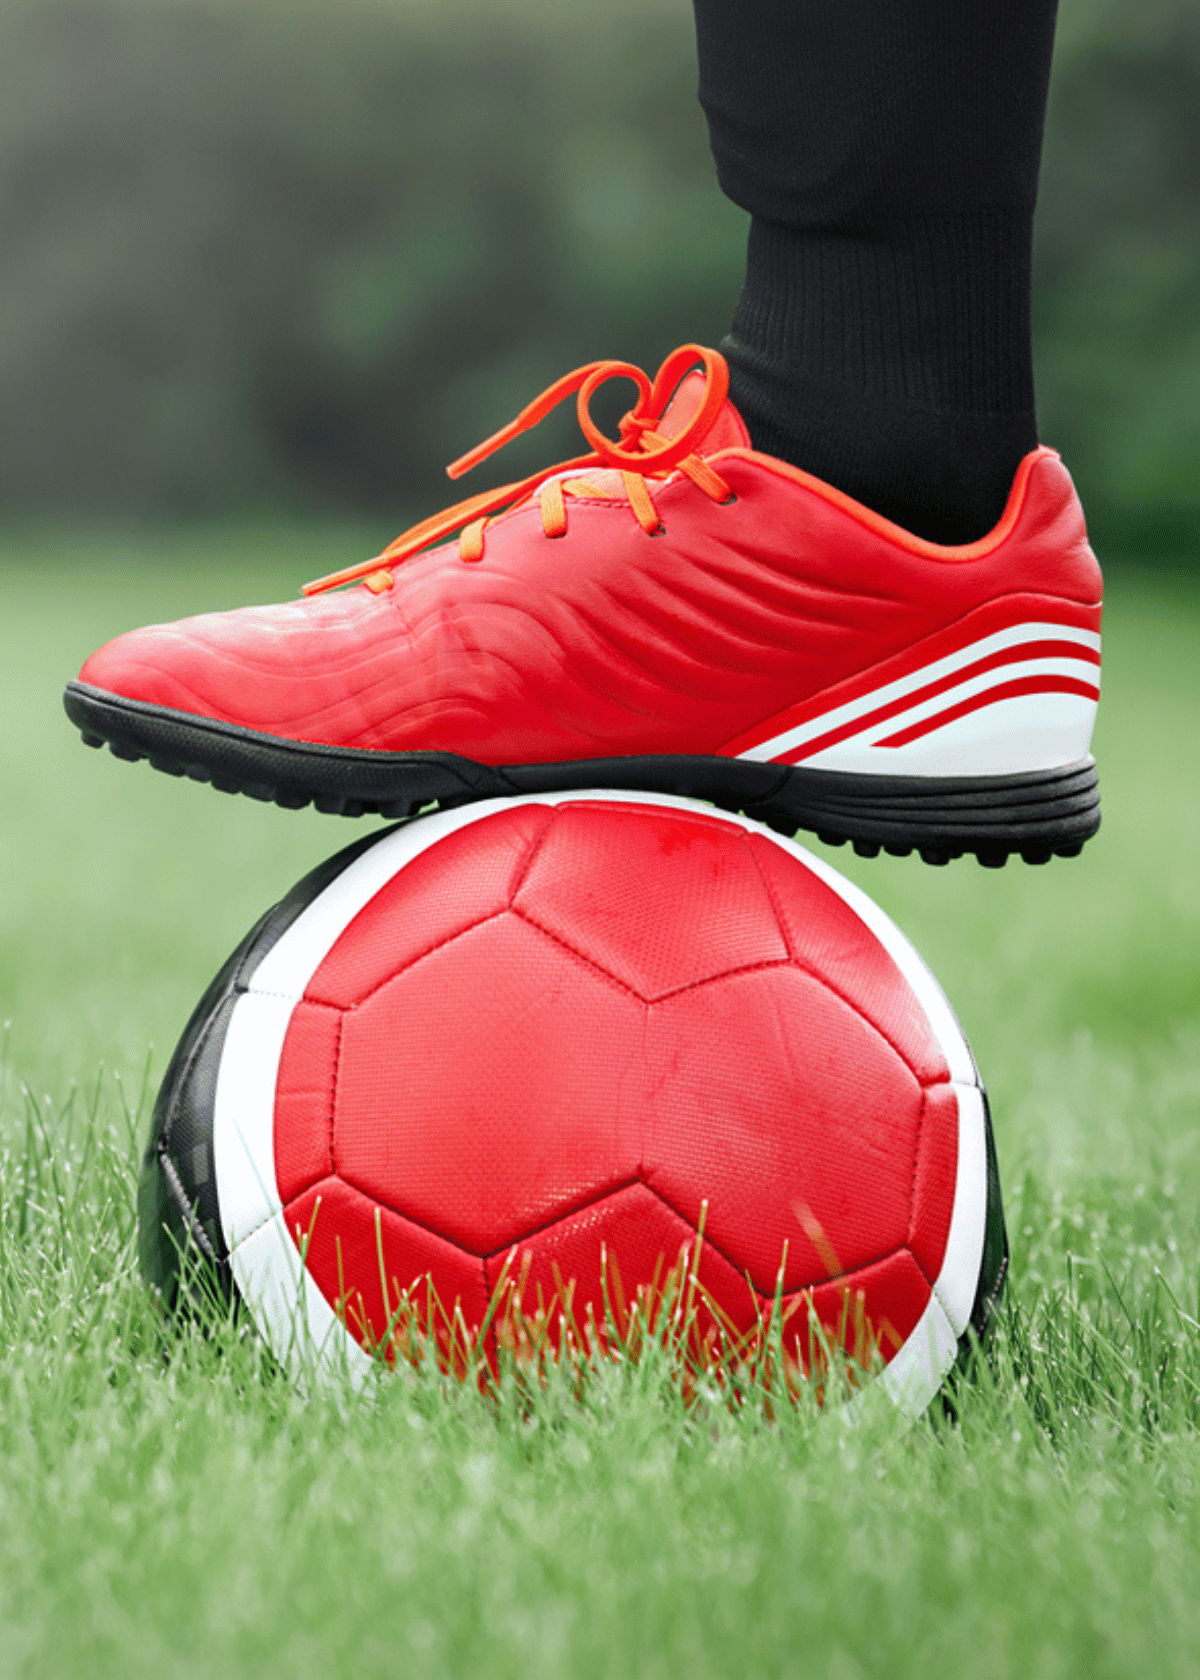 Seeing Red: The Best Red Soccer Cleats for Junior Players